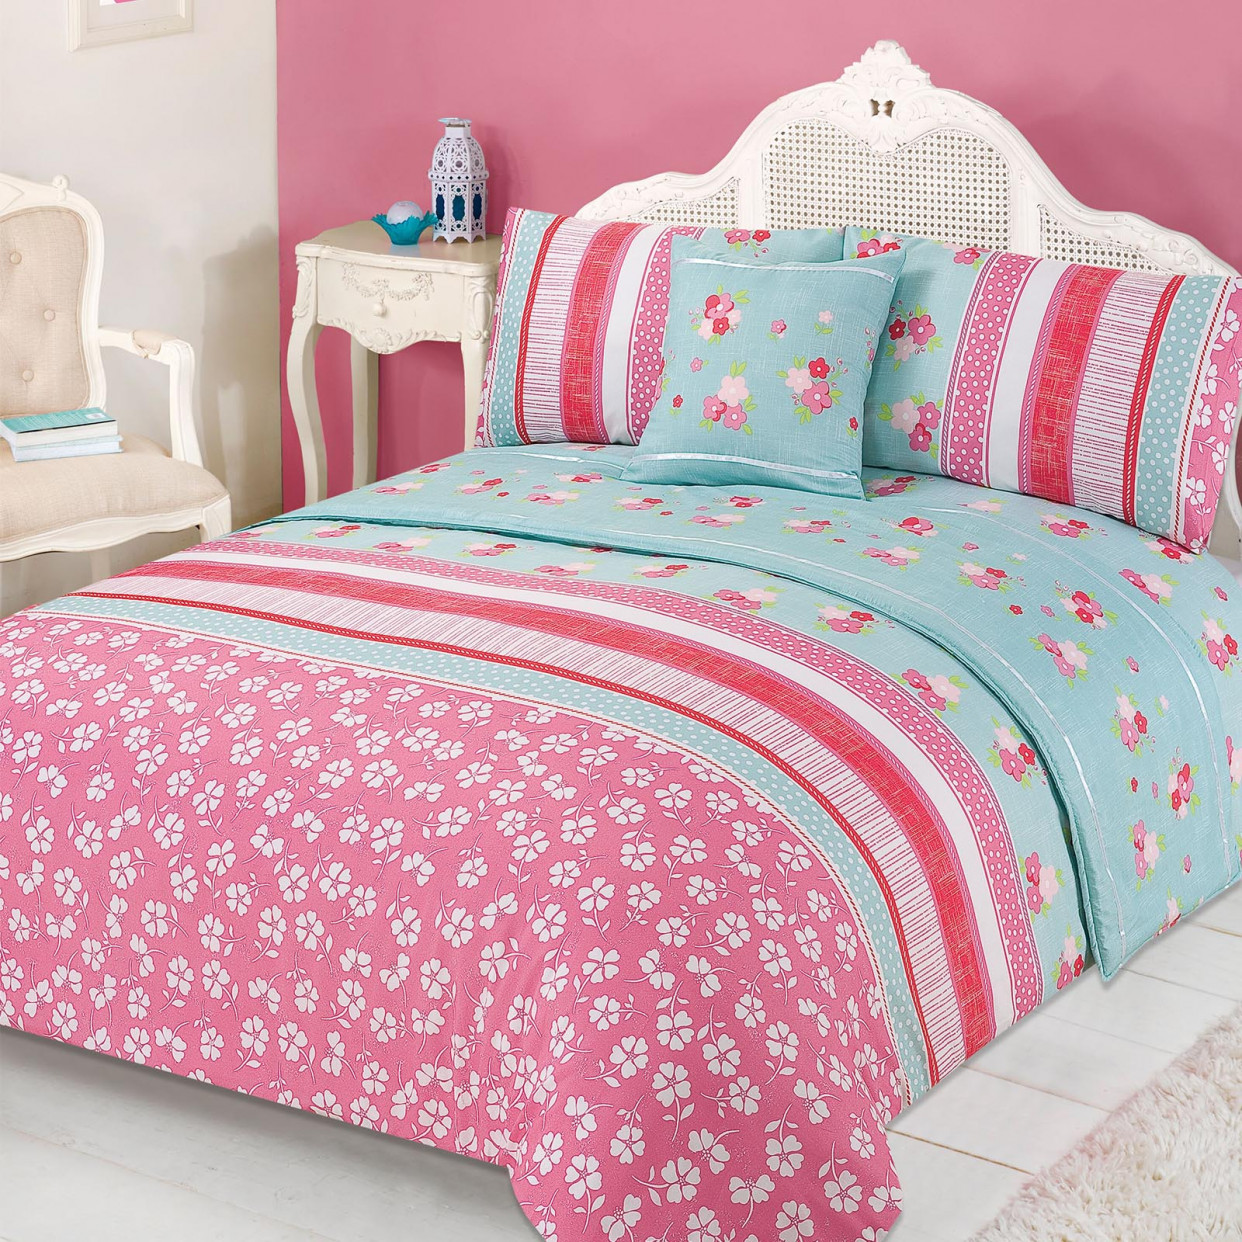 Verity Bed In A Bag Duvet Cover King Size Set - Pink Green>